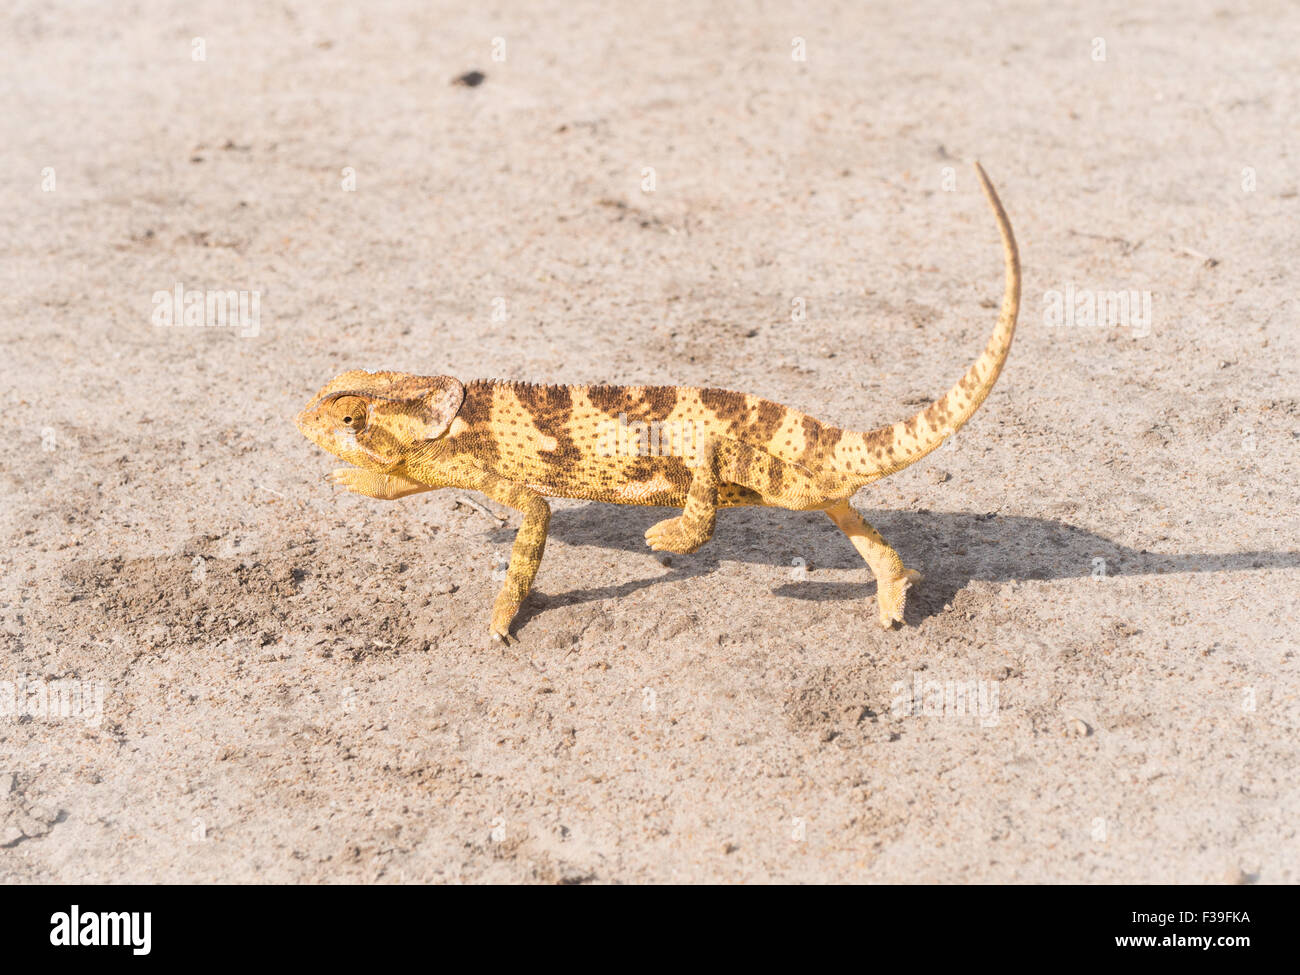 Yellow and brown  wild chameleon walking on a dry ground in Tanzania, Africa Horizontal photo. Stock Photo